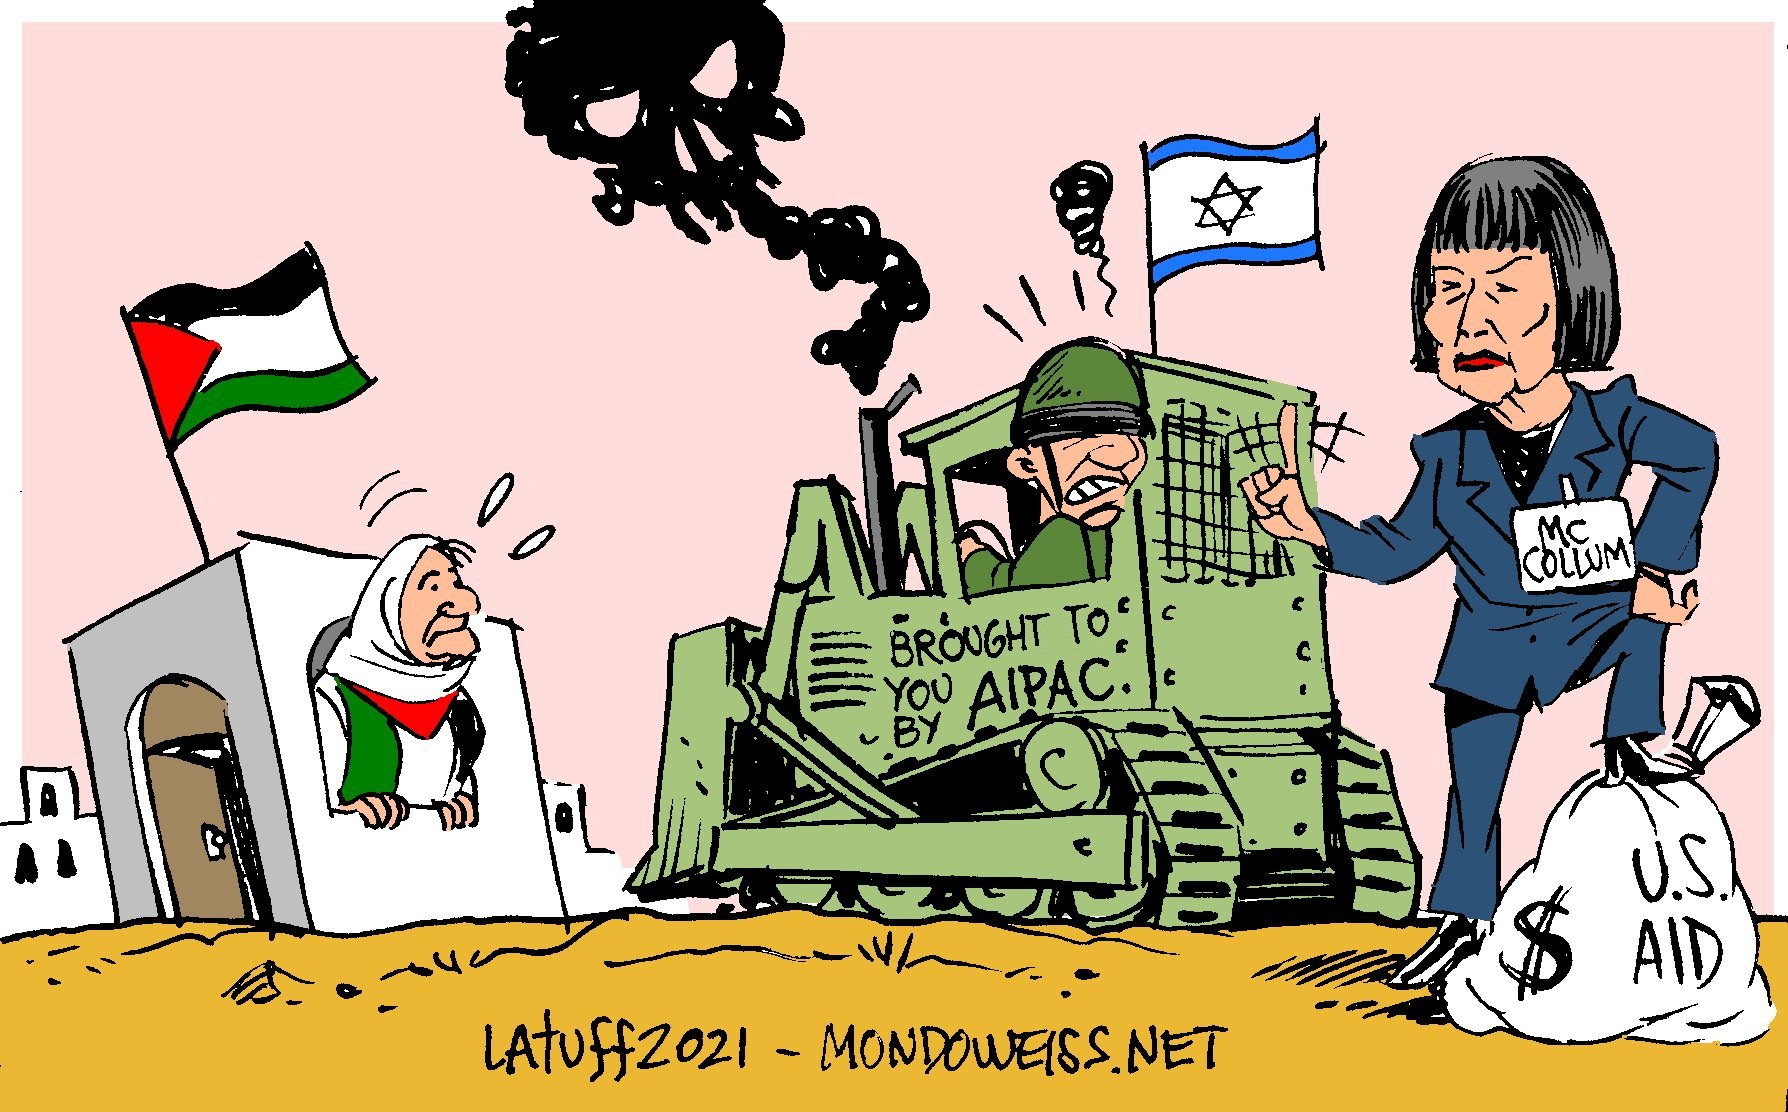 Carlos Latuff on Twitter: "I applaud @BettyMcCollum04 for her courage on  releasing this bill, seeking to end US complicity for #Israel human rights  violations against Palestinians. https://t.co/UhFZ5twERQ Cartoon  @Mondoweiss… https://t.co/ezpiVcHVyG"